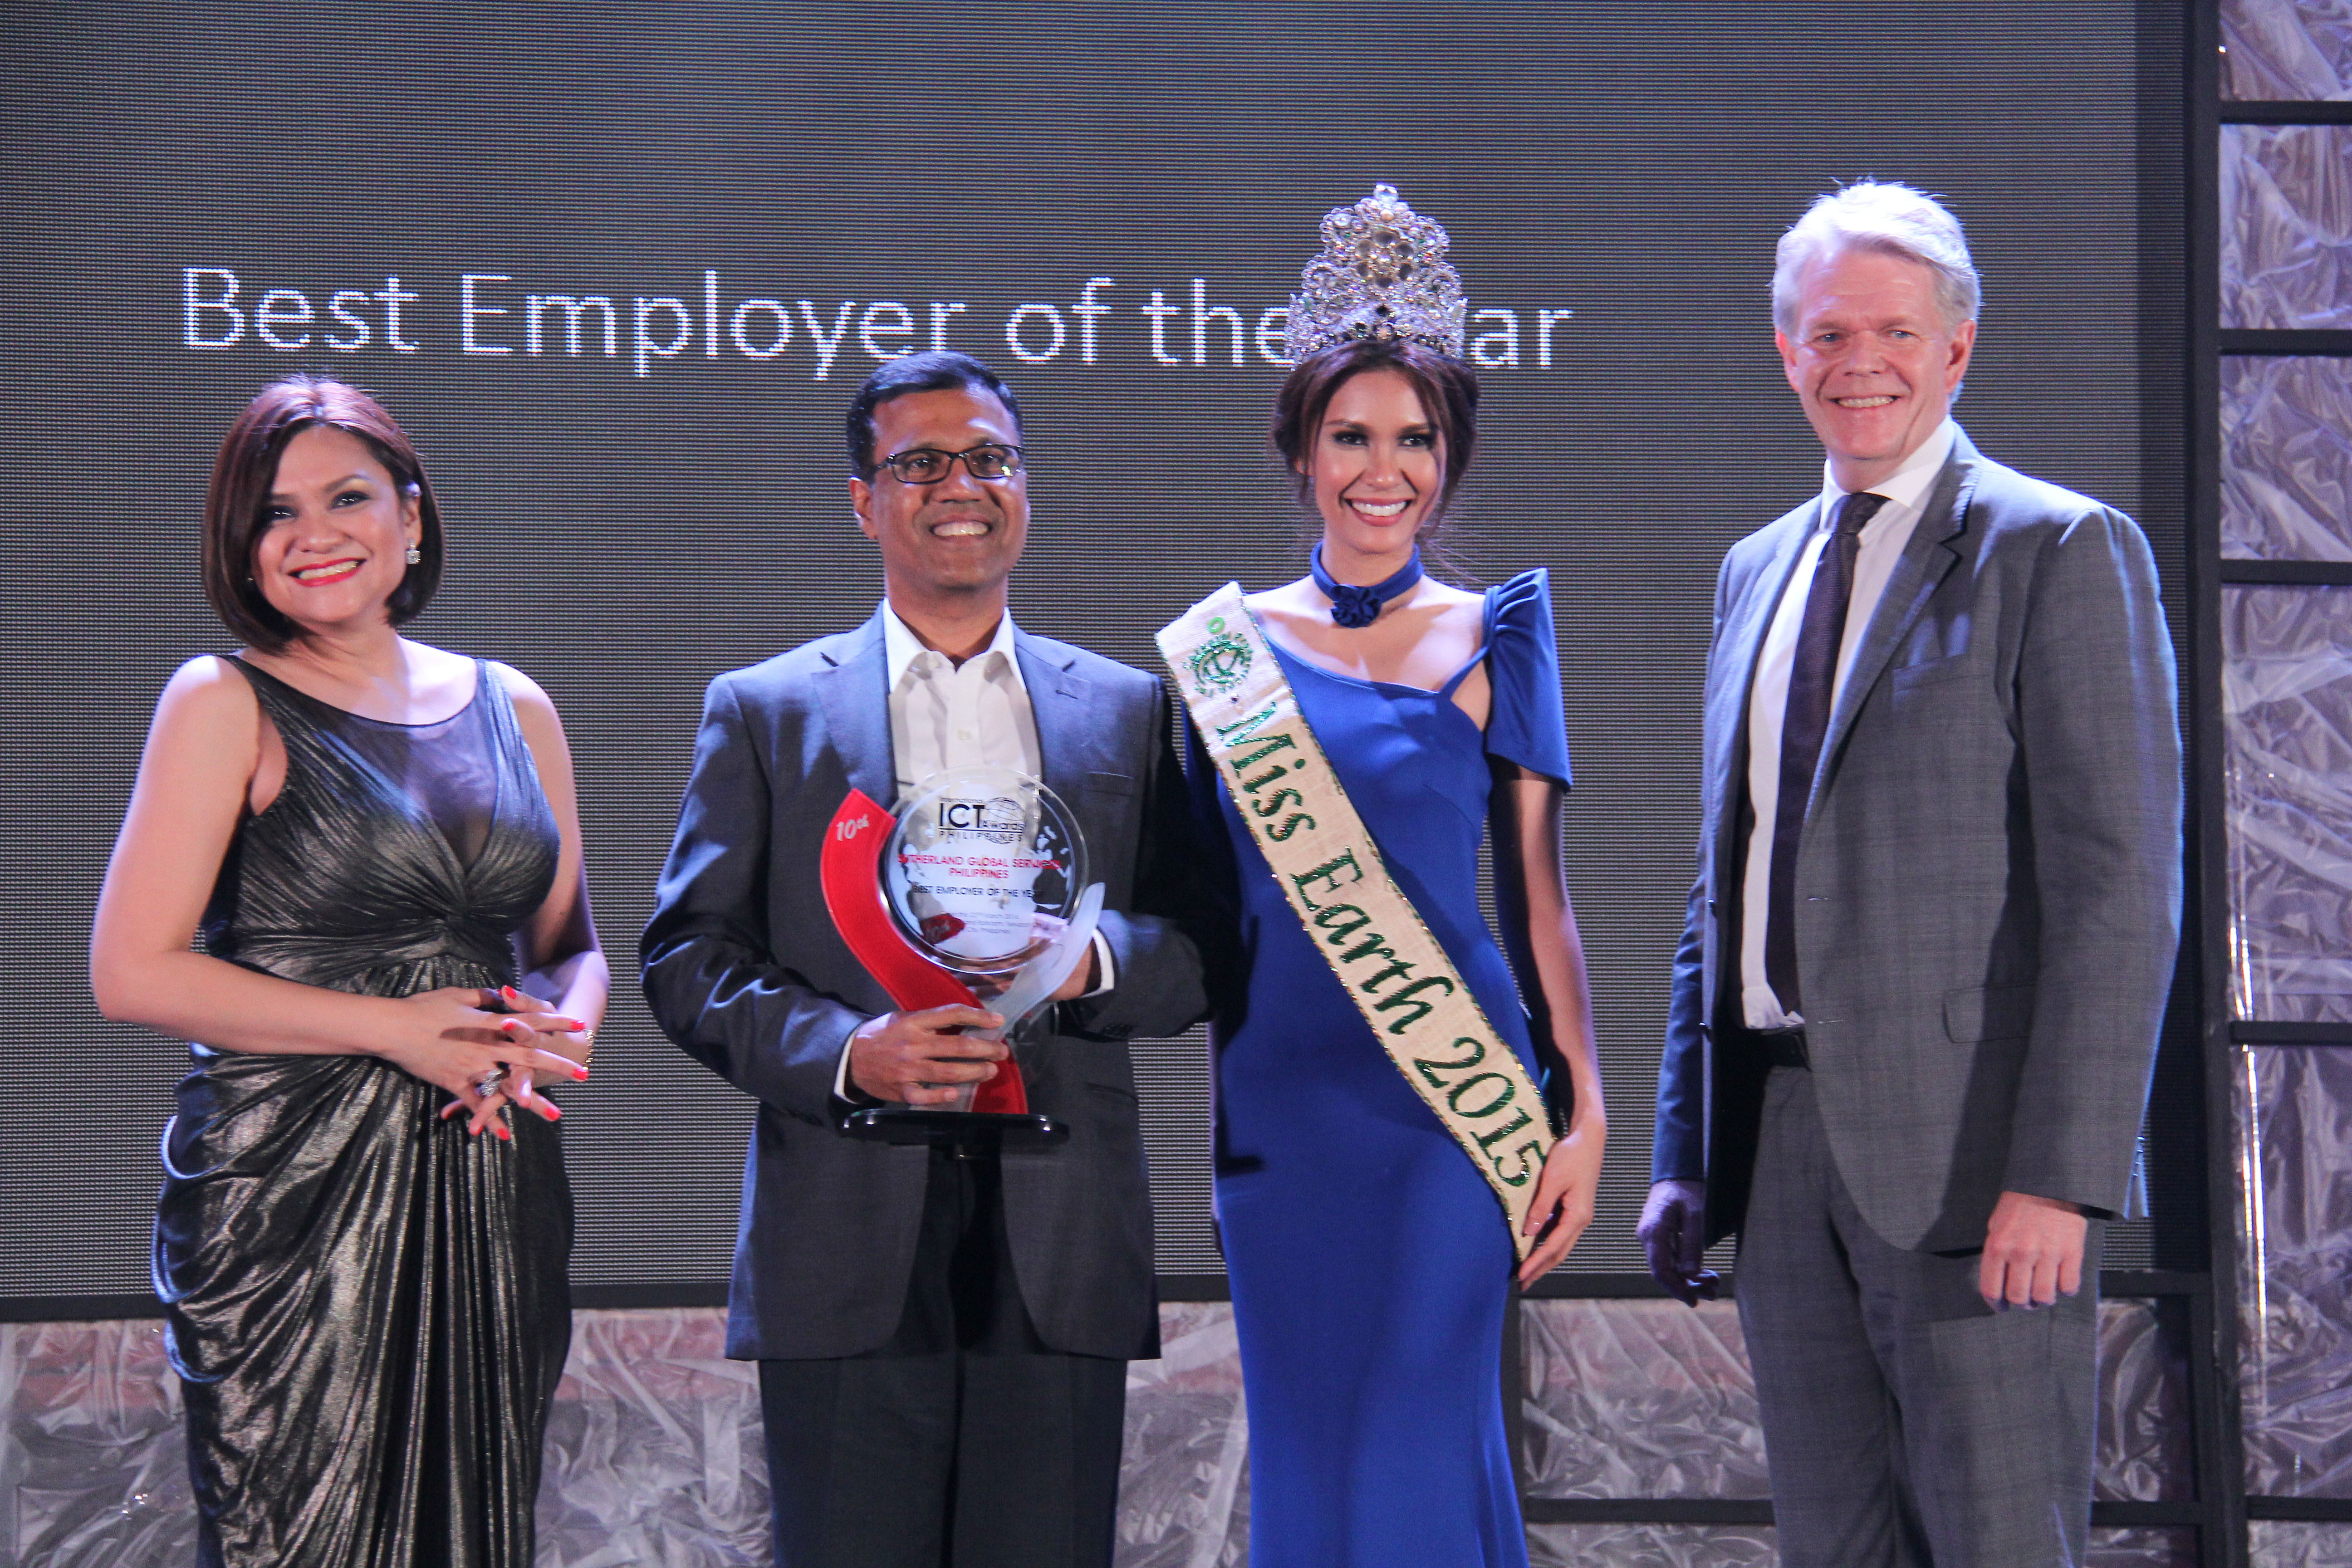 Globe Business presented the Best Employer of the Year award to Sutherland Global Services Philippines at the recent 10th International ICT Awards. Presenting the award to Sutherland is Globe Senior Advisor for Enterprise and IT-Enabled Services Group Mike Frausing (rightmost) together with Miss Earth 2015 Angelia Ong.